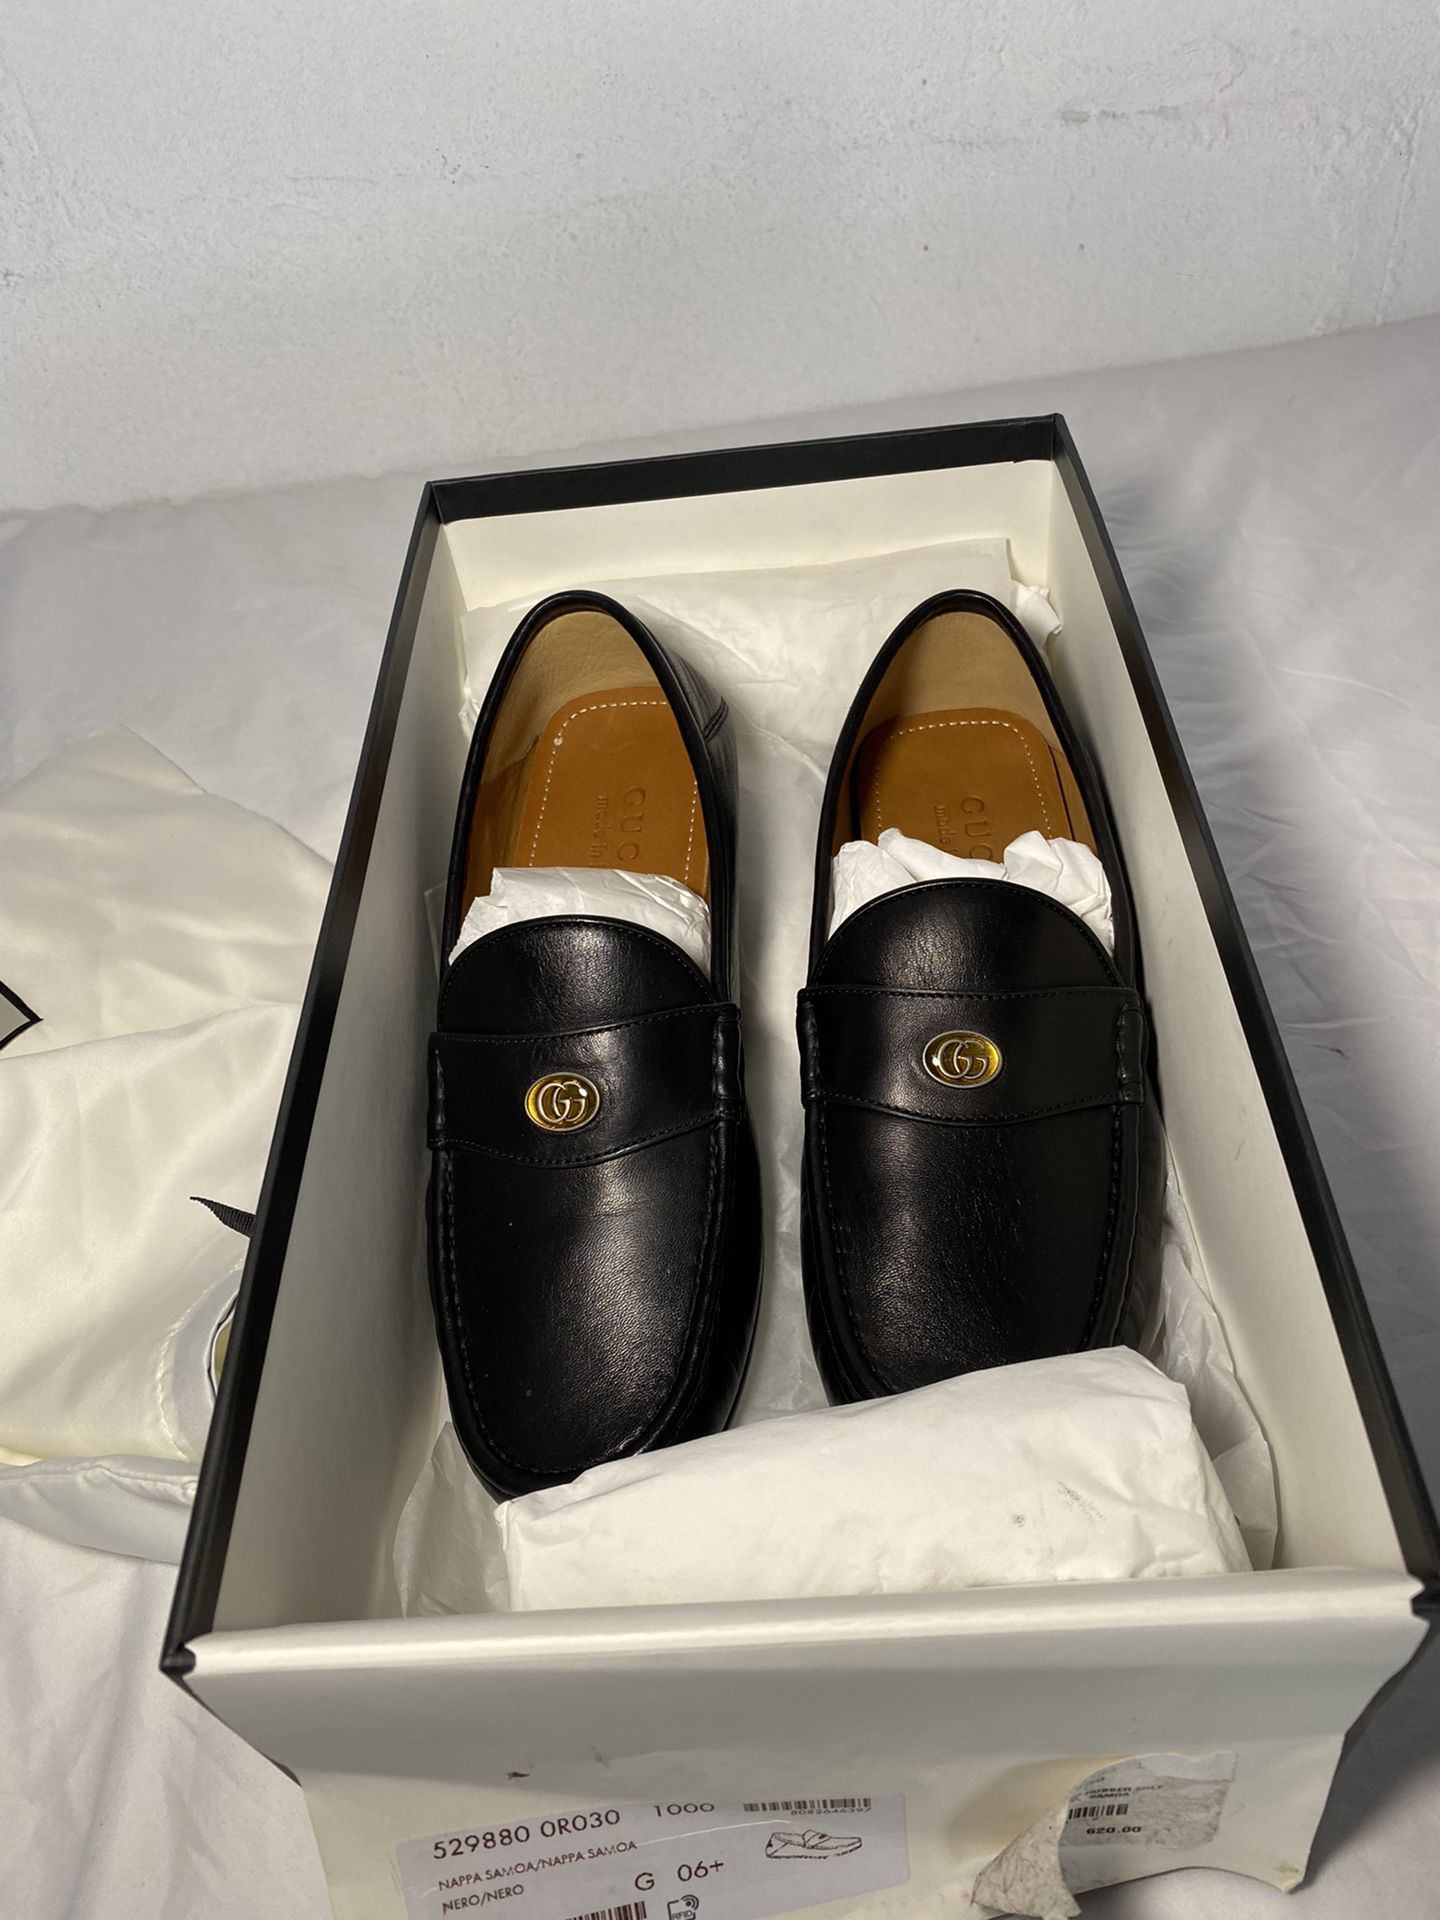 Brand New Mens Gucci Loafers Dress Shoes 